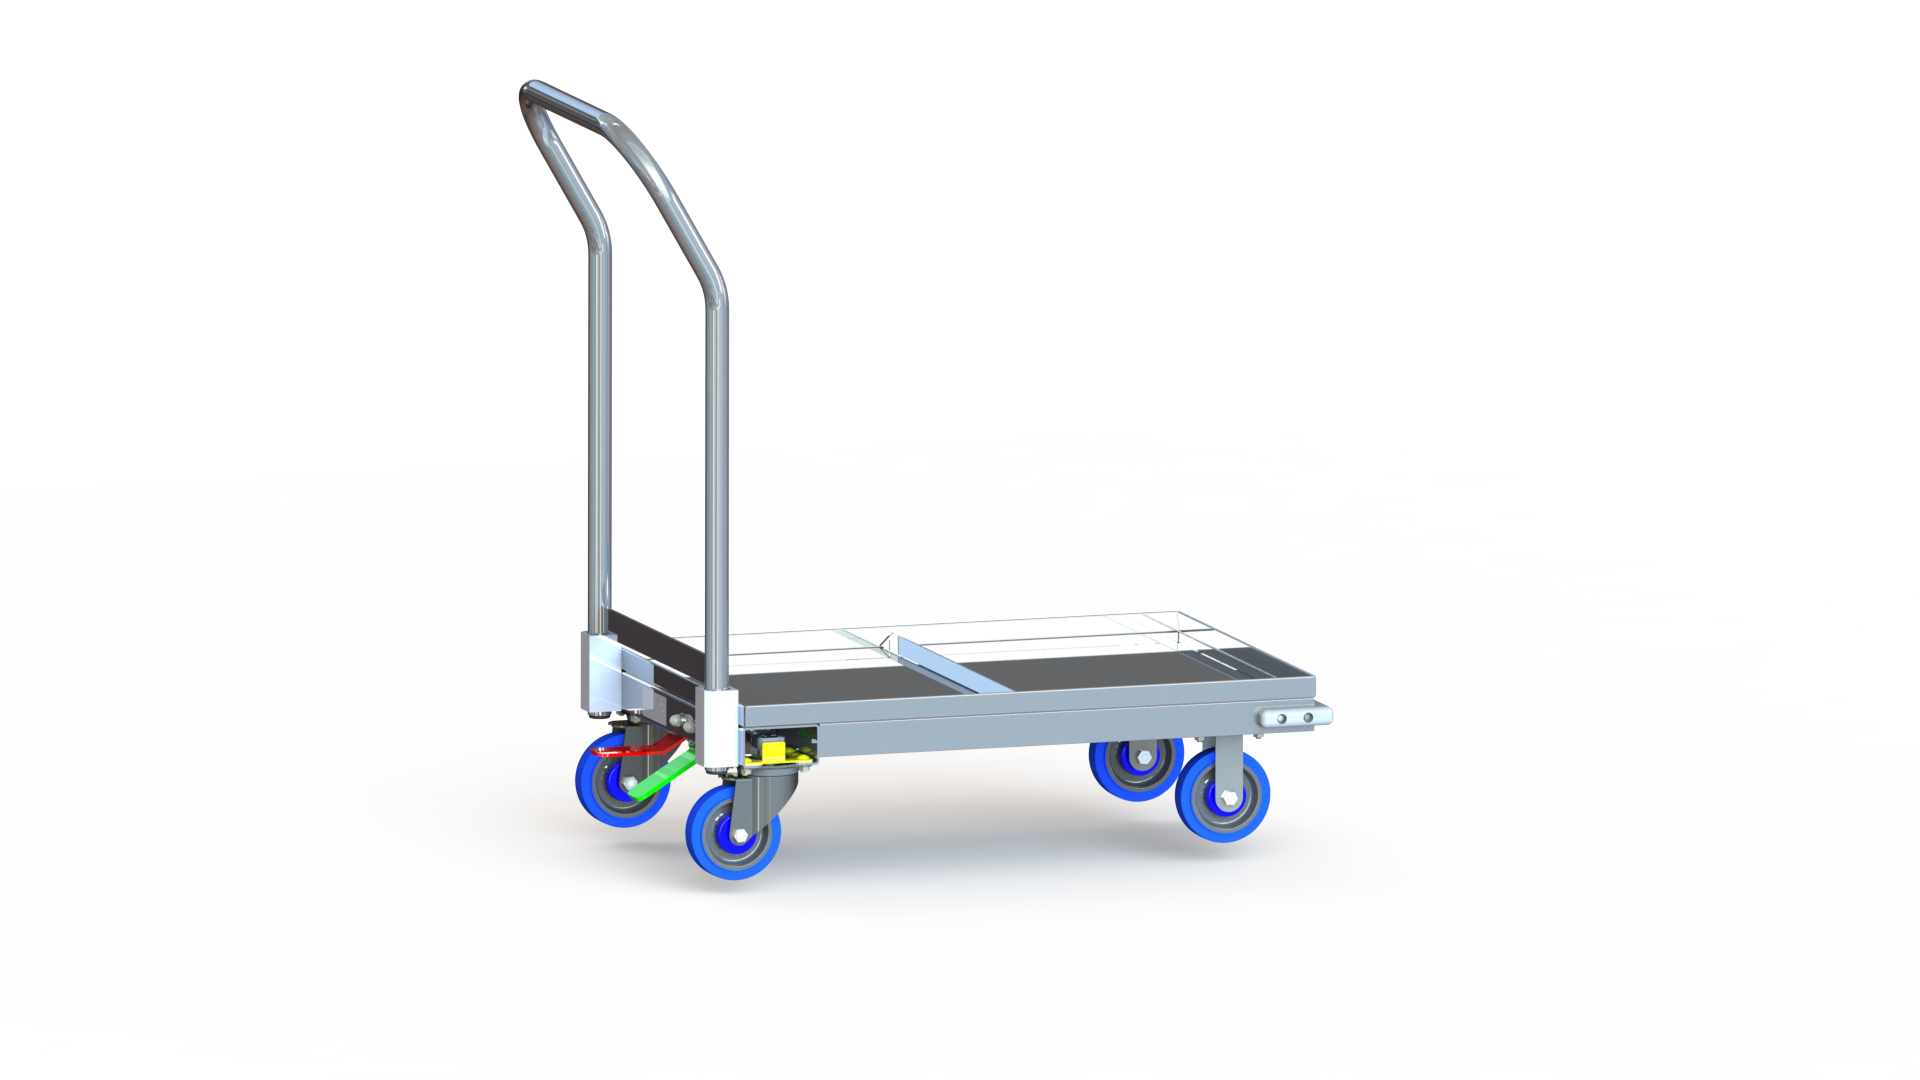 Tote Dolly National Cart Co. Aluminum Tote Dolly